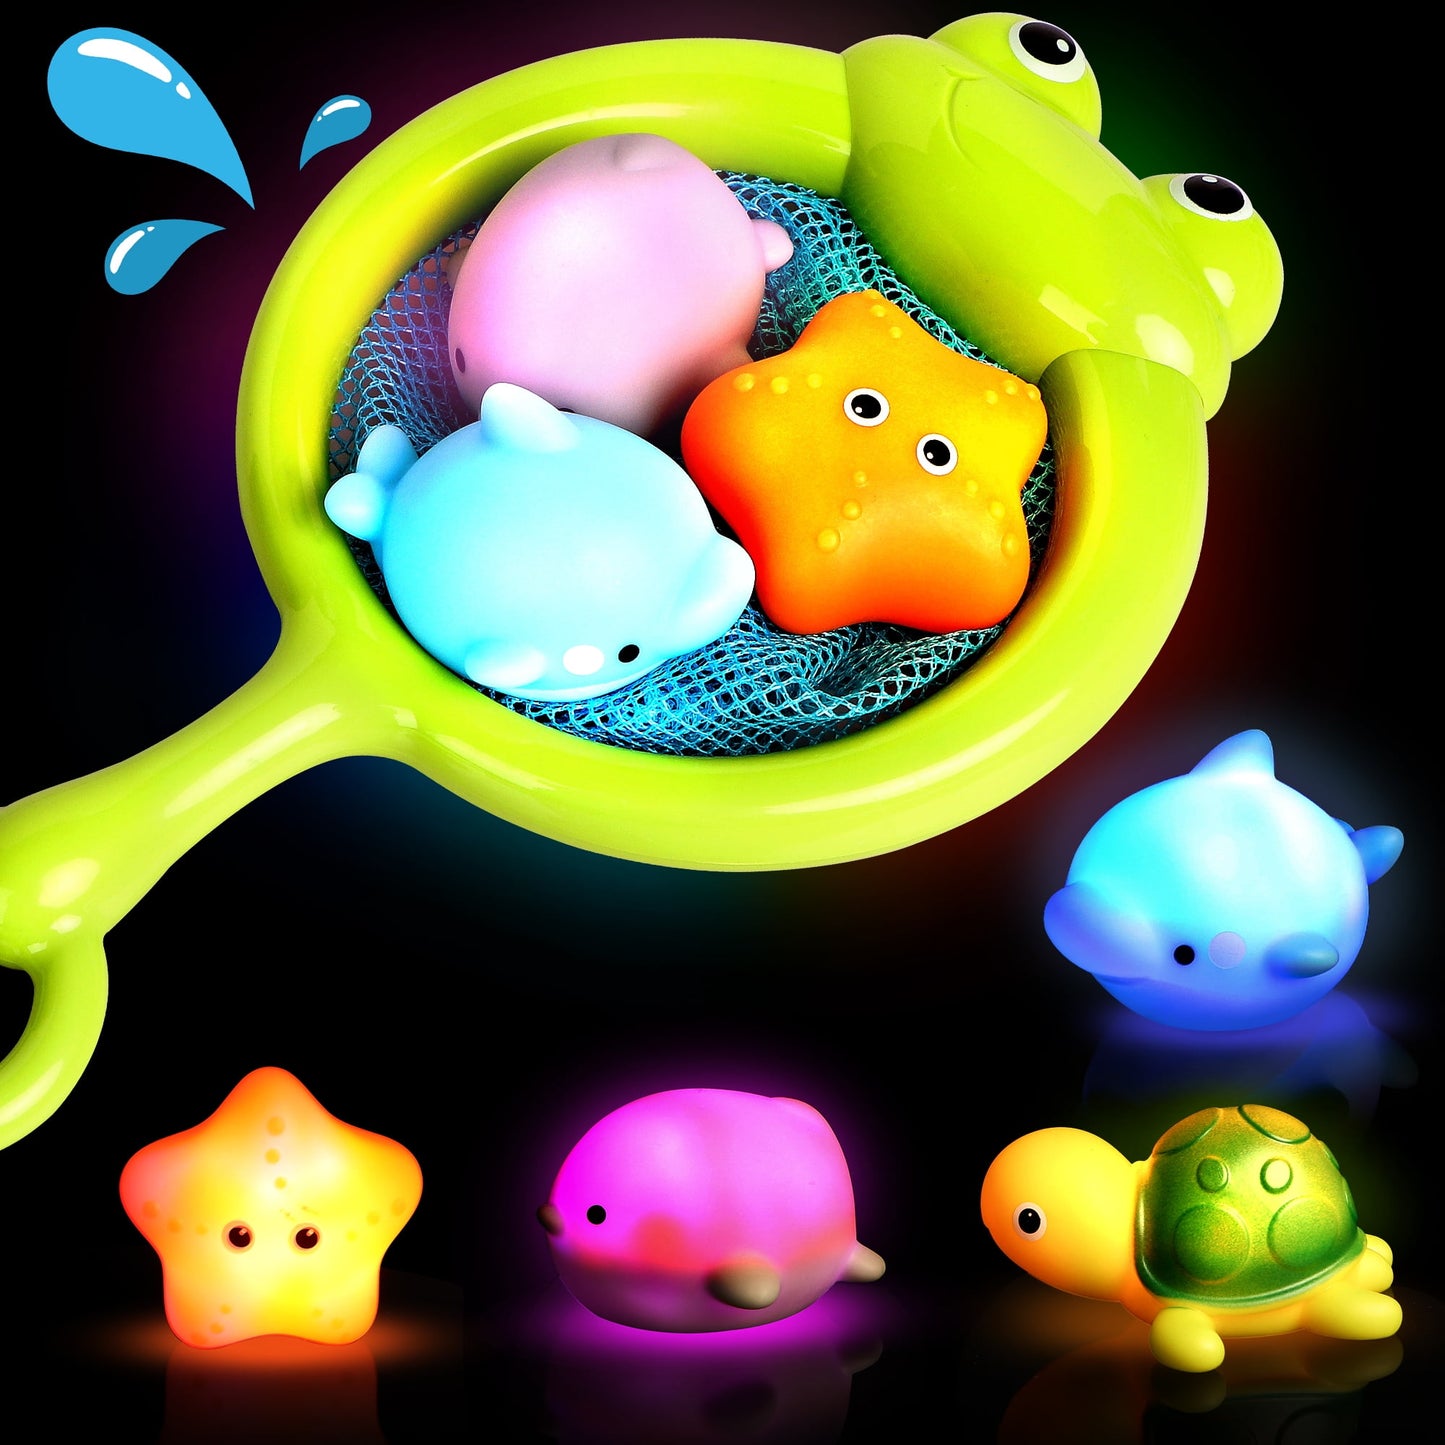 Bath Toys,4 Pcs Light Up Floating Rubber Animal Toys Set with Fishing net, Bathtub Tub Toy for Toddlers Baby Kids Infant Girls Boys